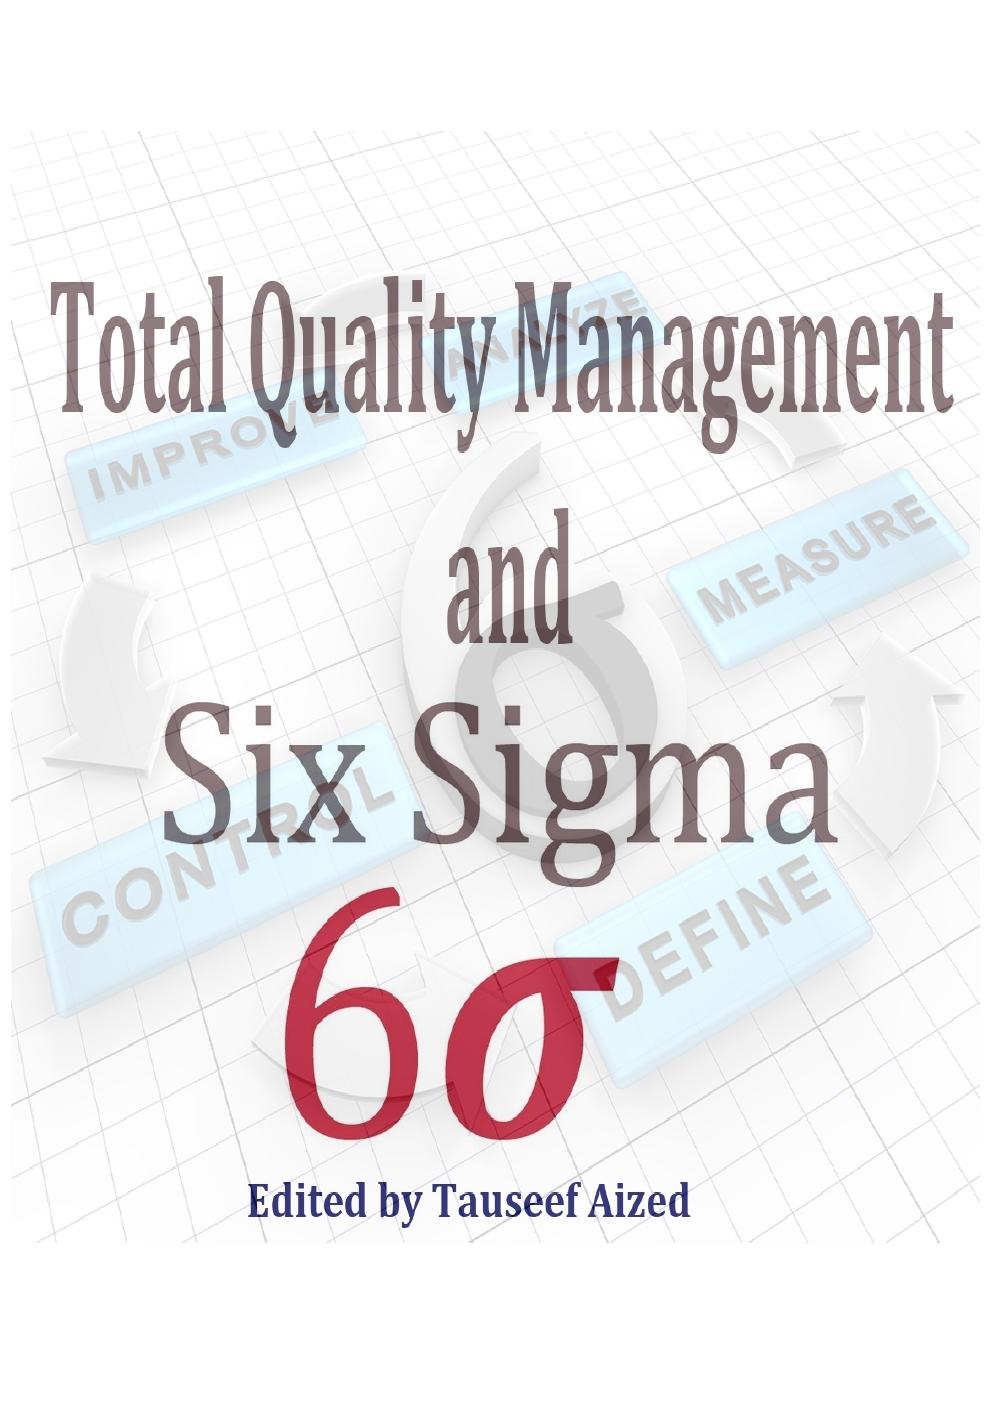 Total Quality Management and Six Sigma 2016